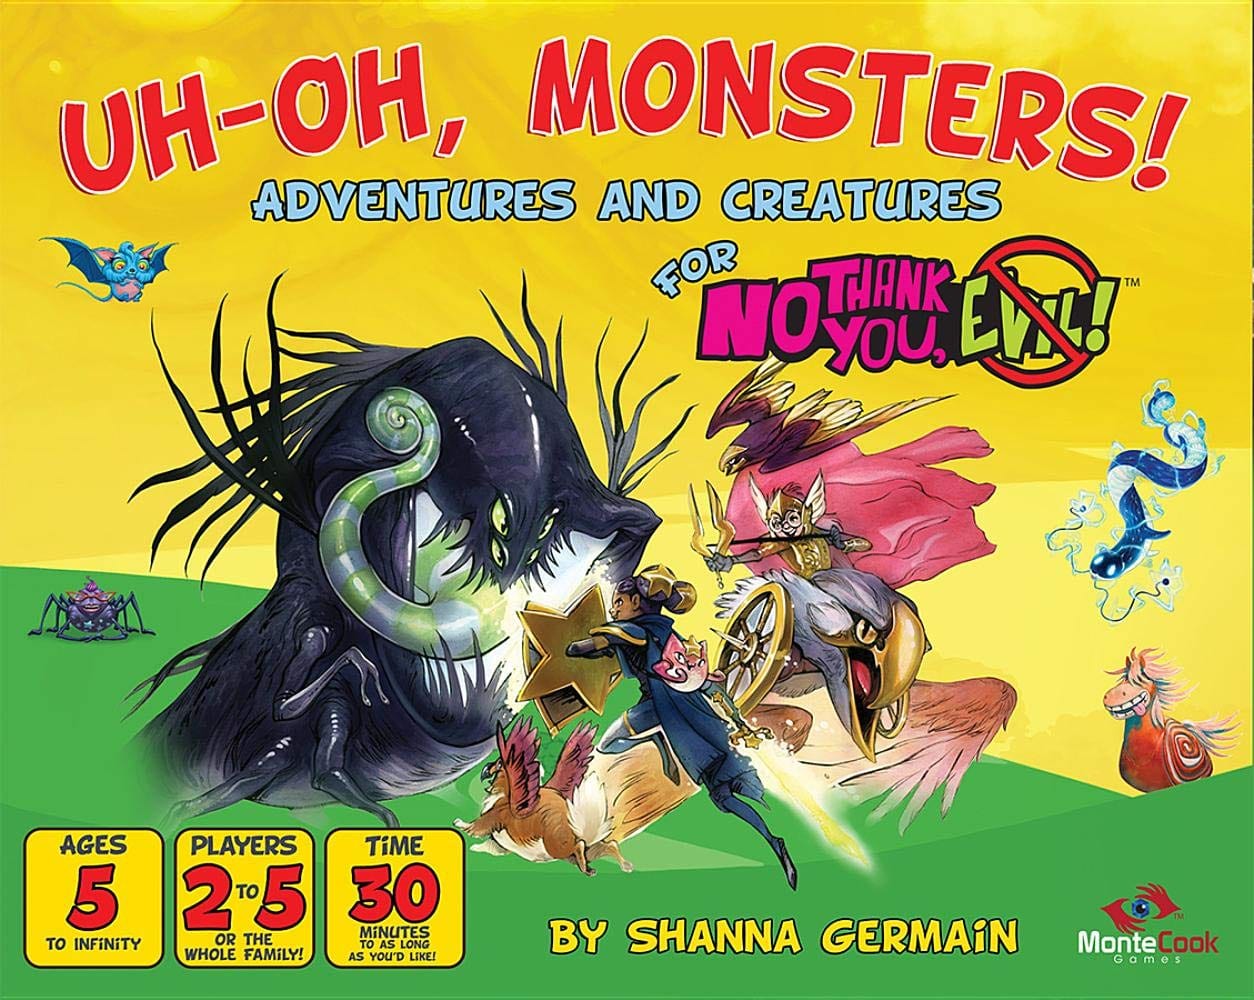 Monte Cook Games Role Playing Games Monte Cook Games No Thank You Evil! RPG: Uh-Oh Monsters!